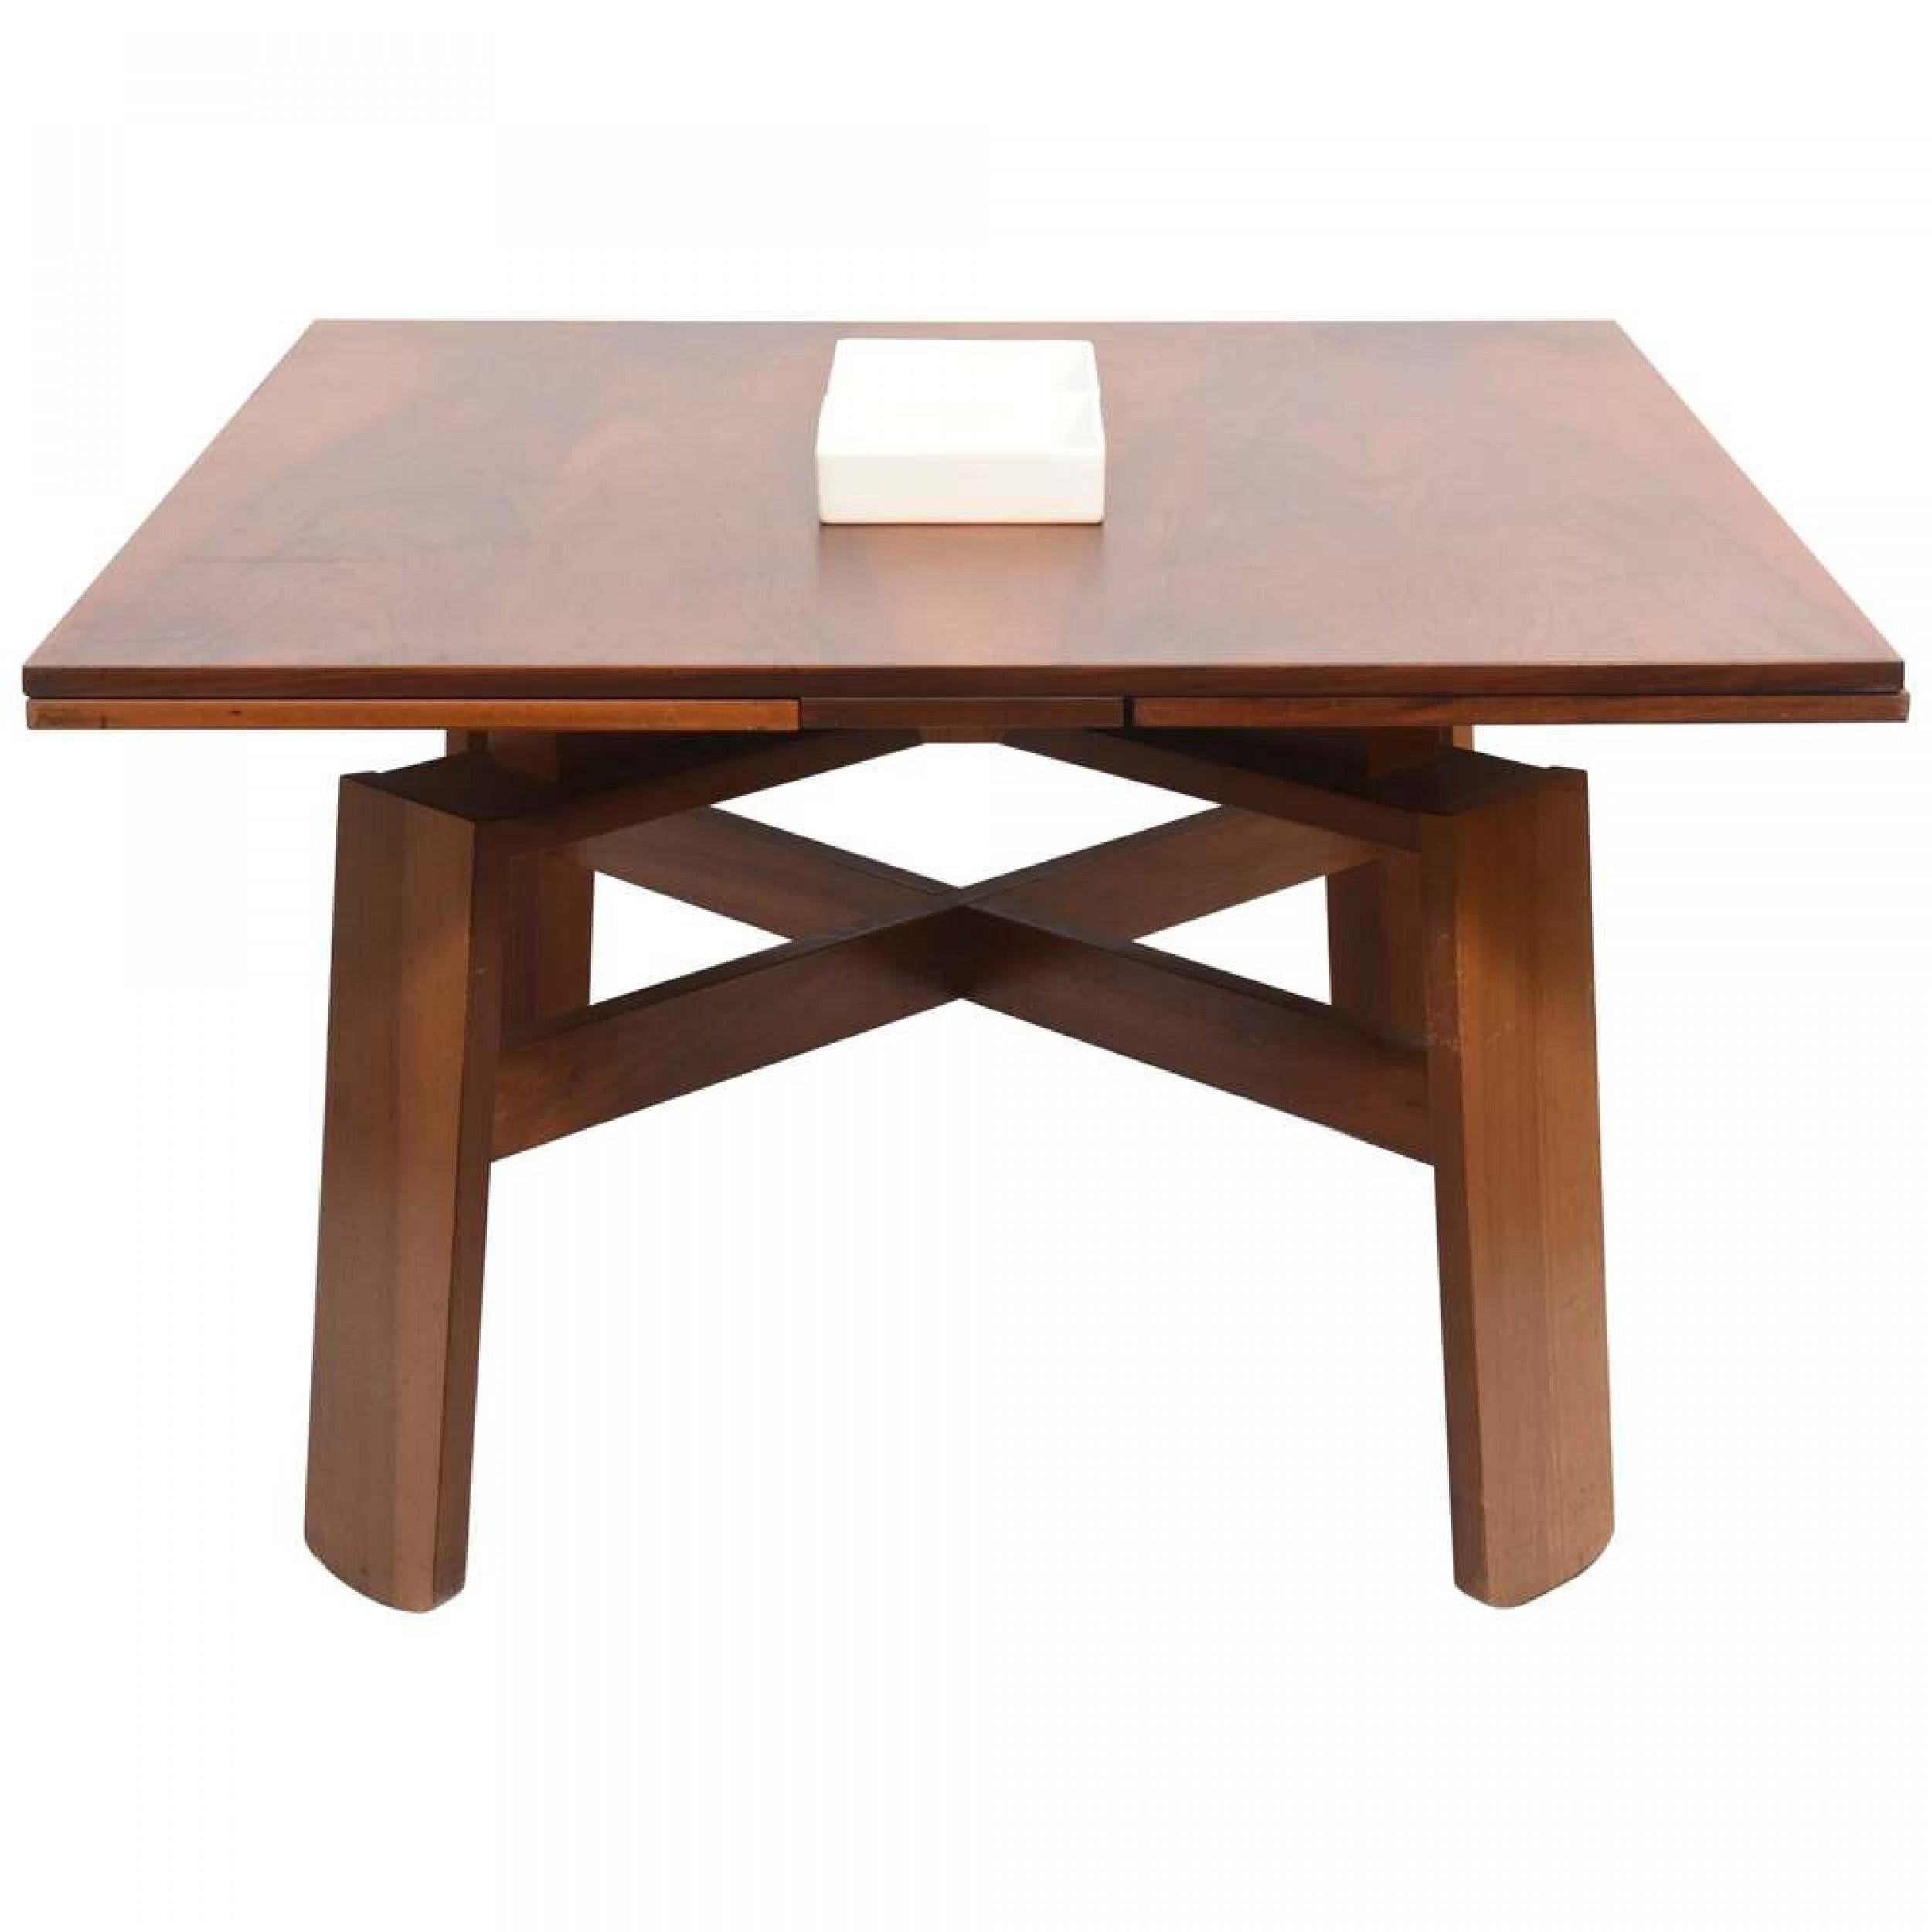 Italian Mid-Century Modern extension table with two fold out leaves resting on four wide legs connected with an x-shaped stretcher.(SILVIO COPPOLA).